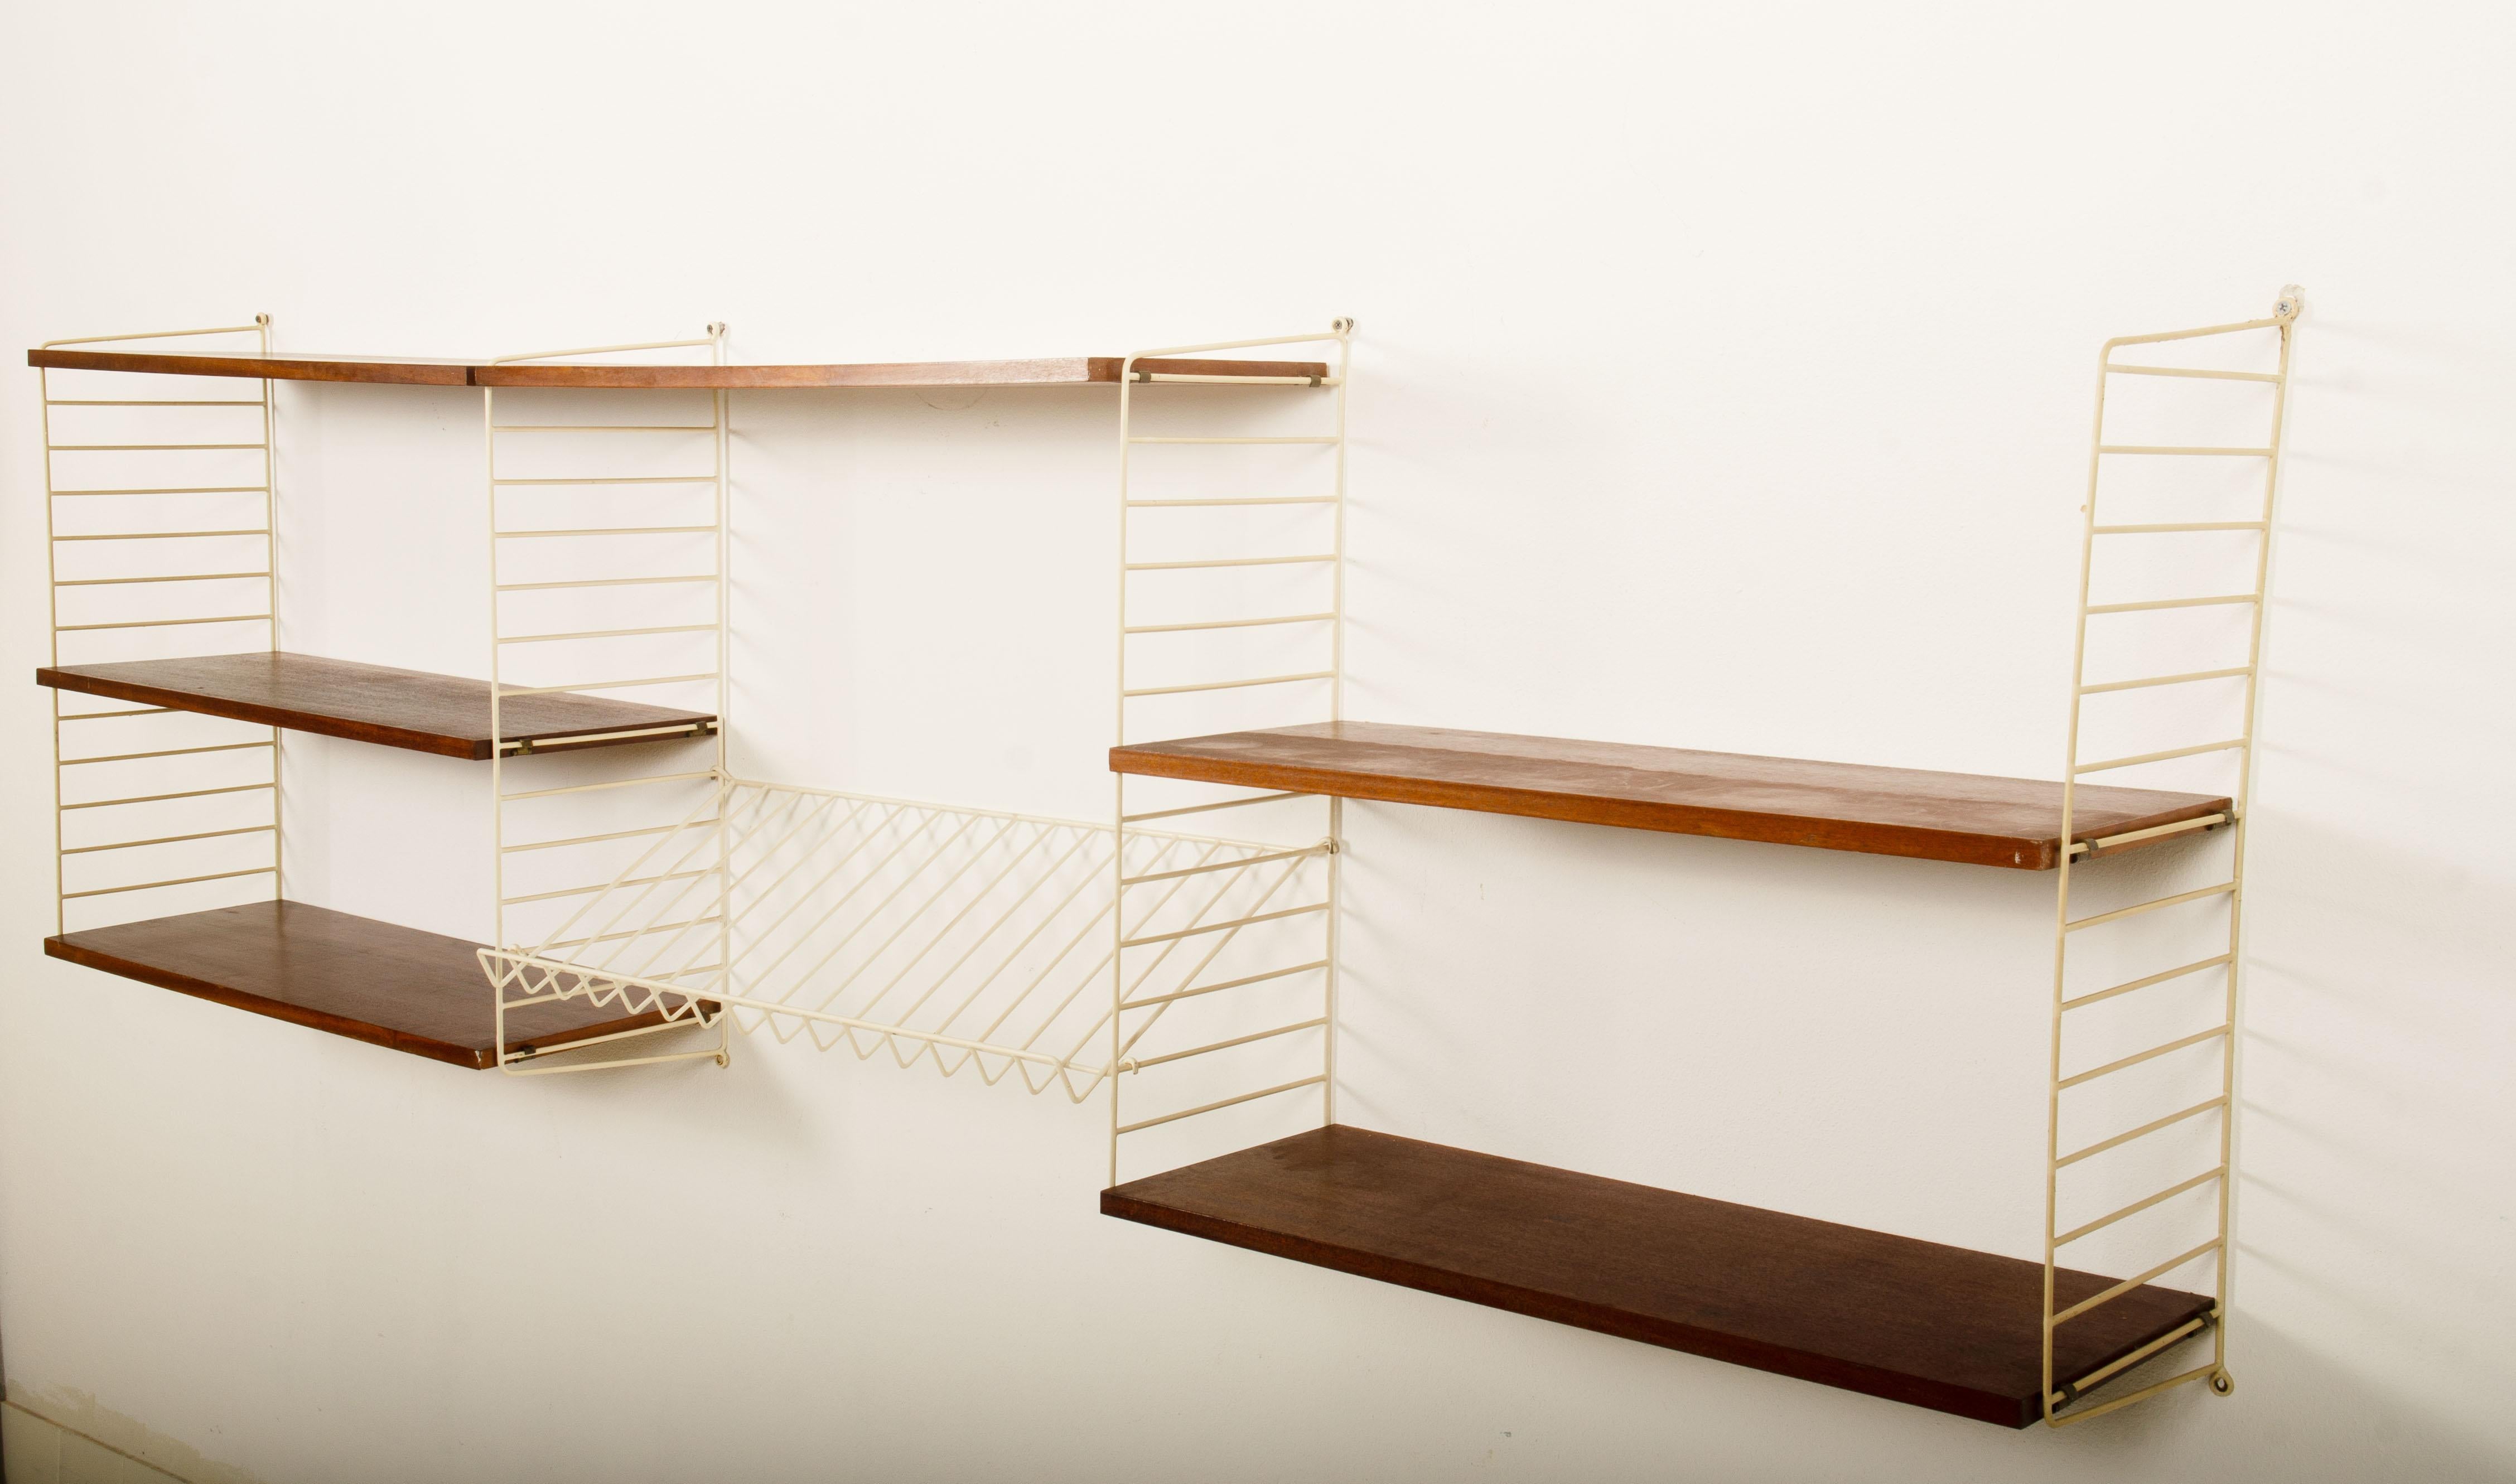 Modular String Wall Unit in Teak by Nisse Strinning For Sale 8